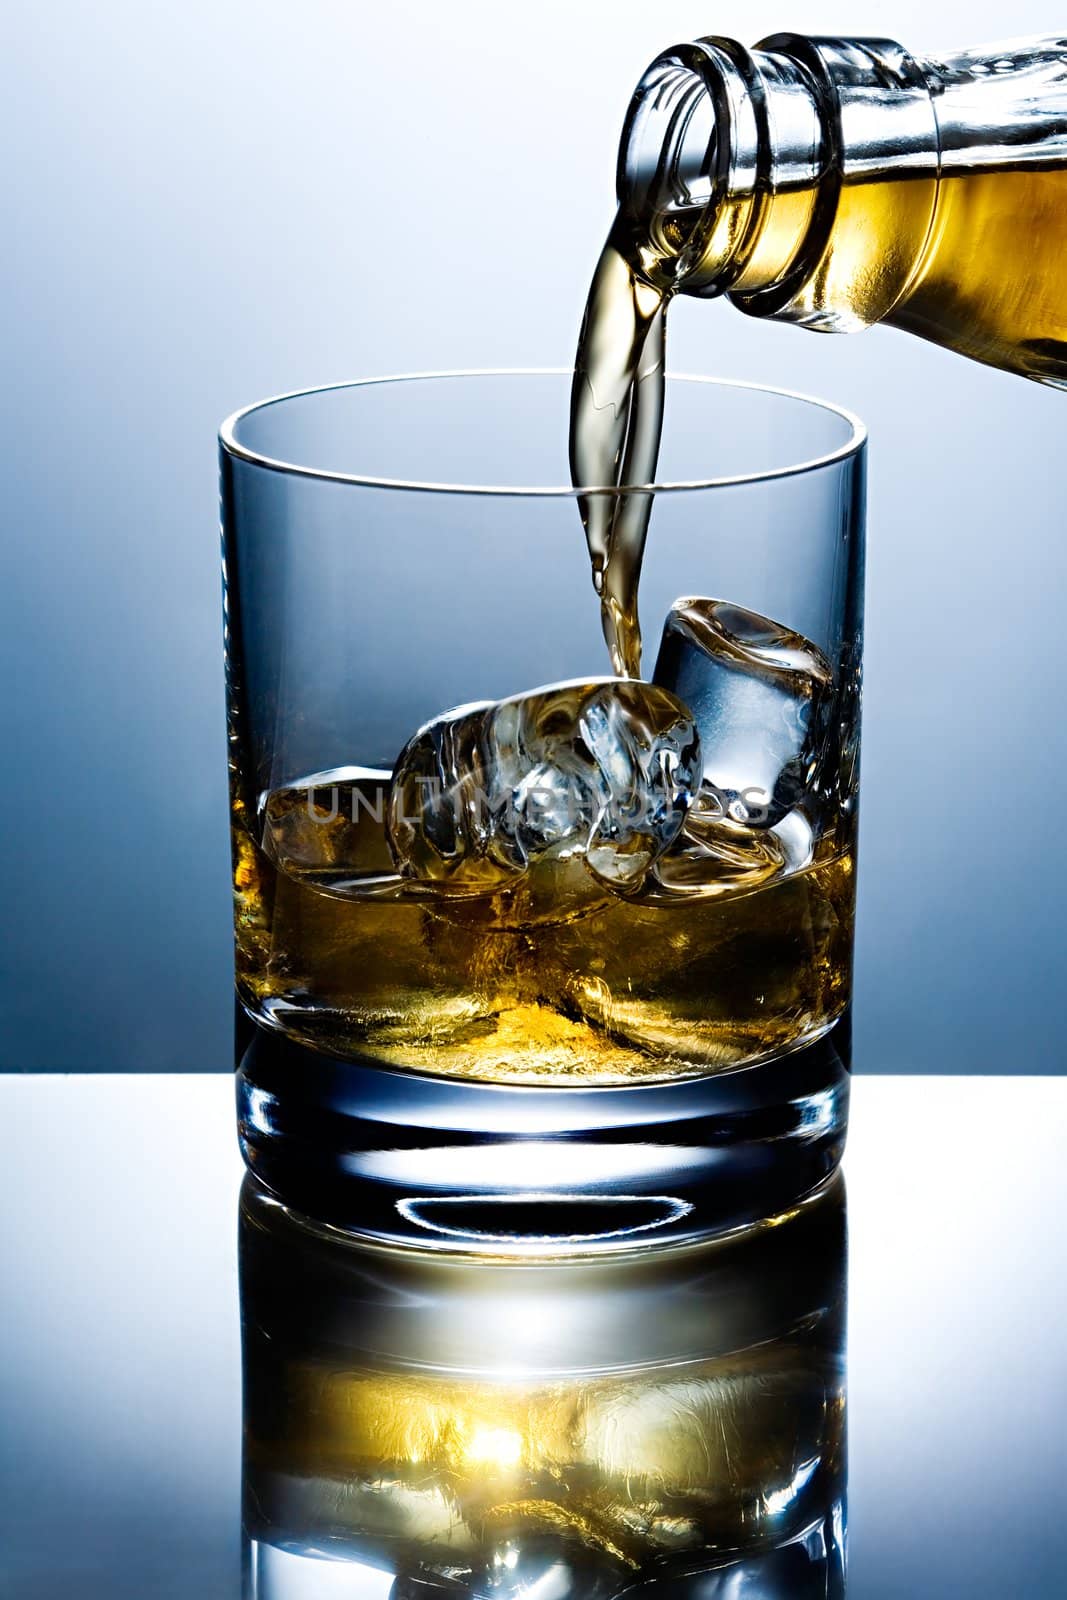 Filling of a glass of whisky with ice
